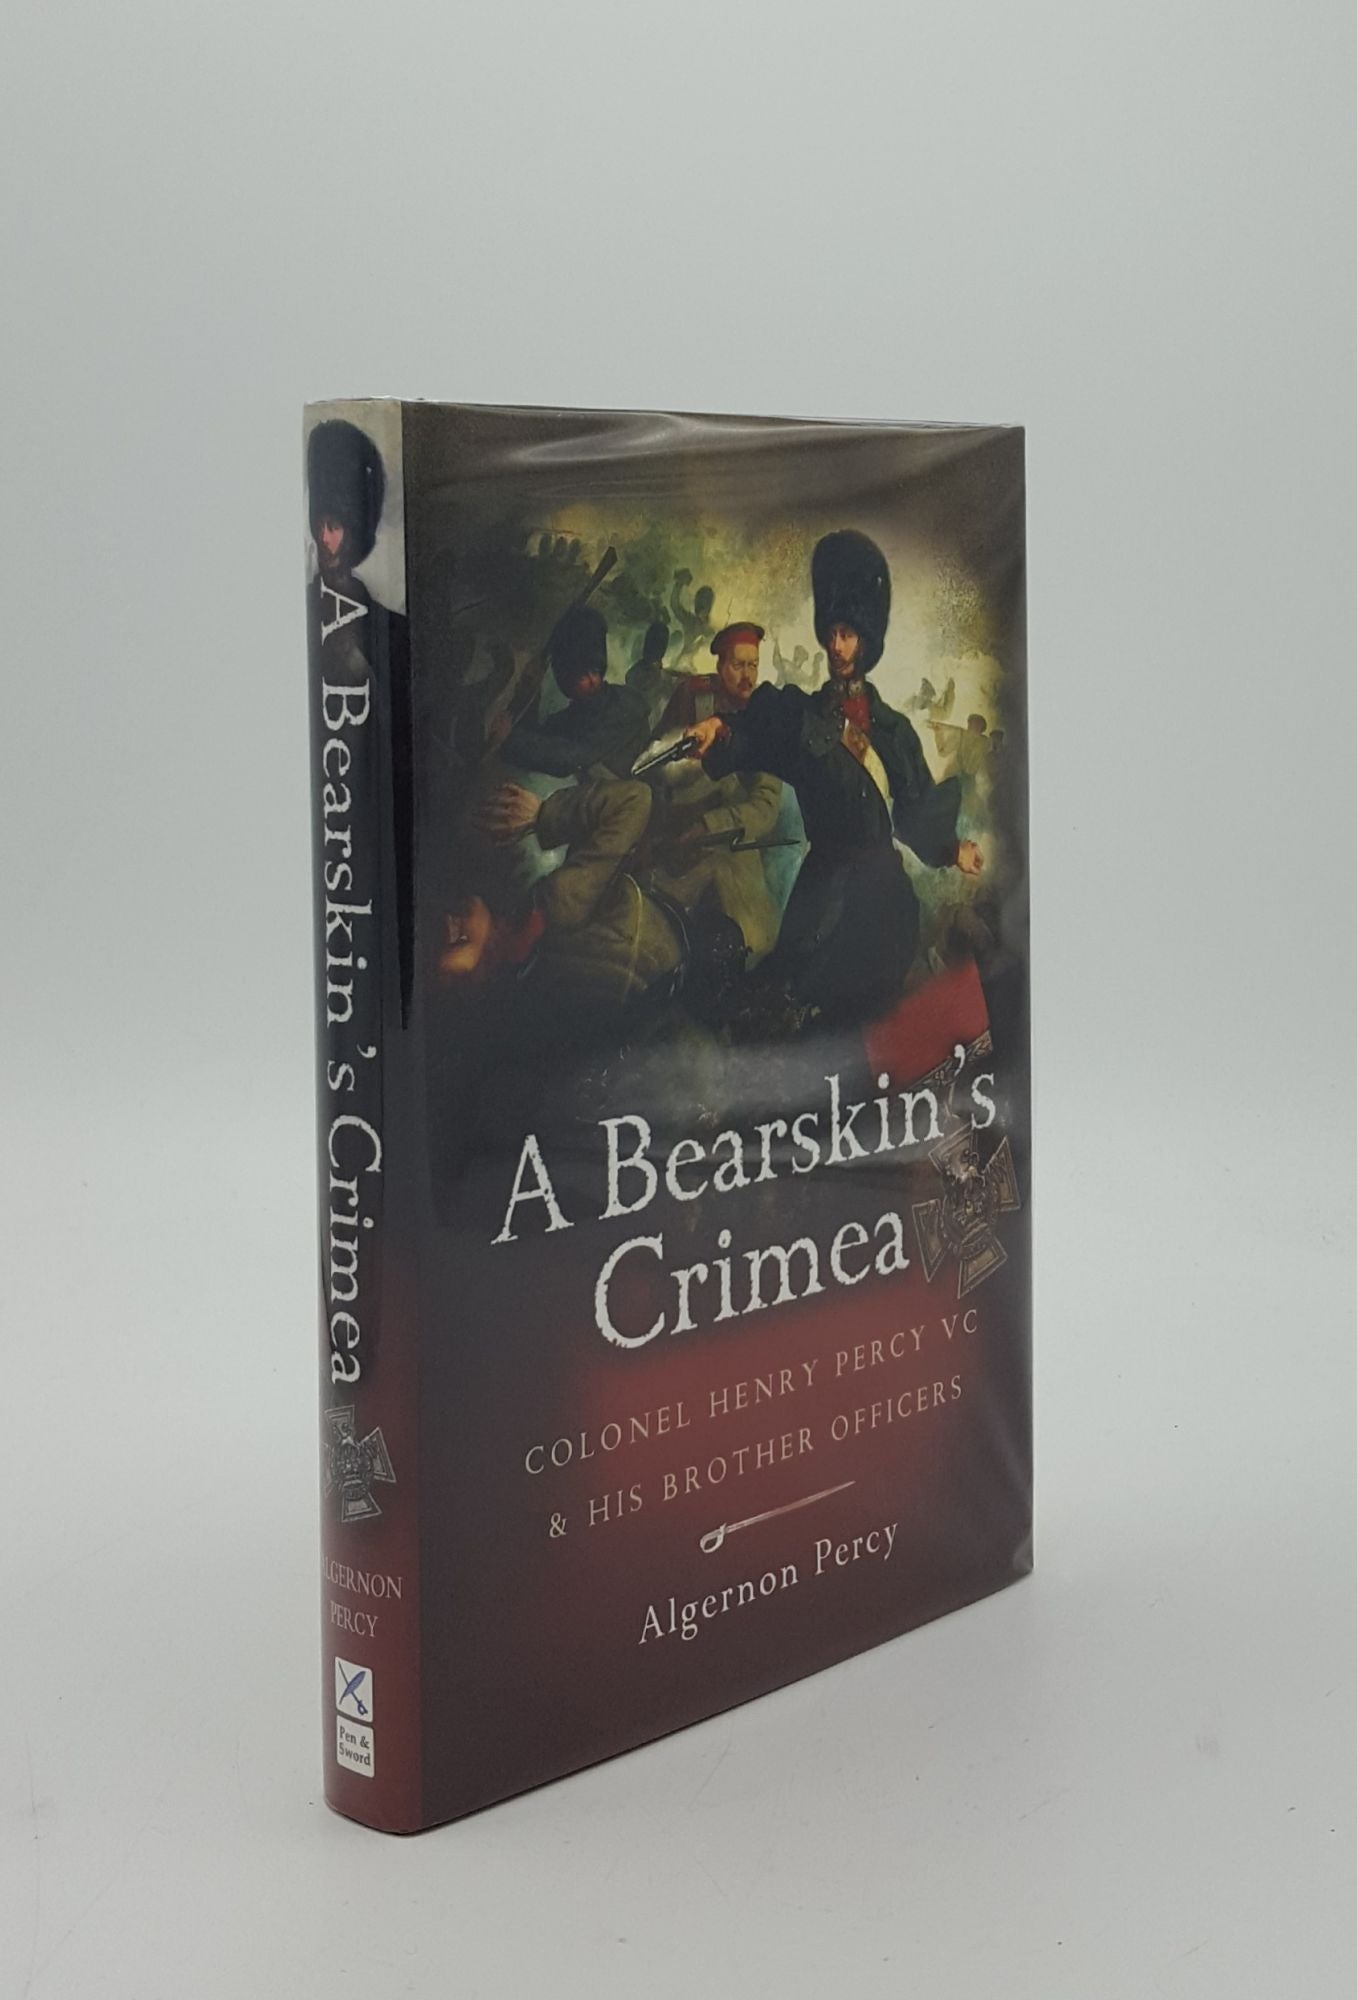 PERCY Algernon - A Bearskin's Crimea Colonel Henry Percy VC and His Brother Officers